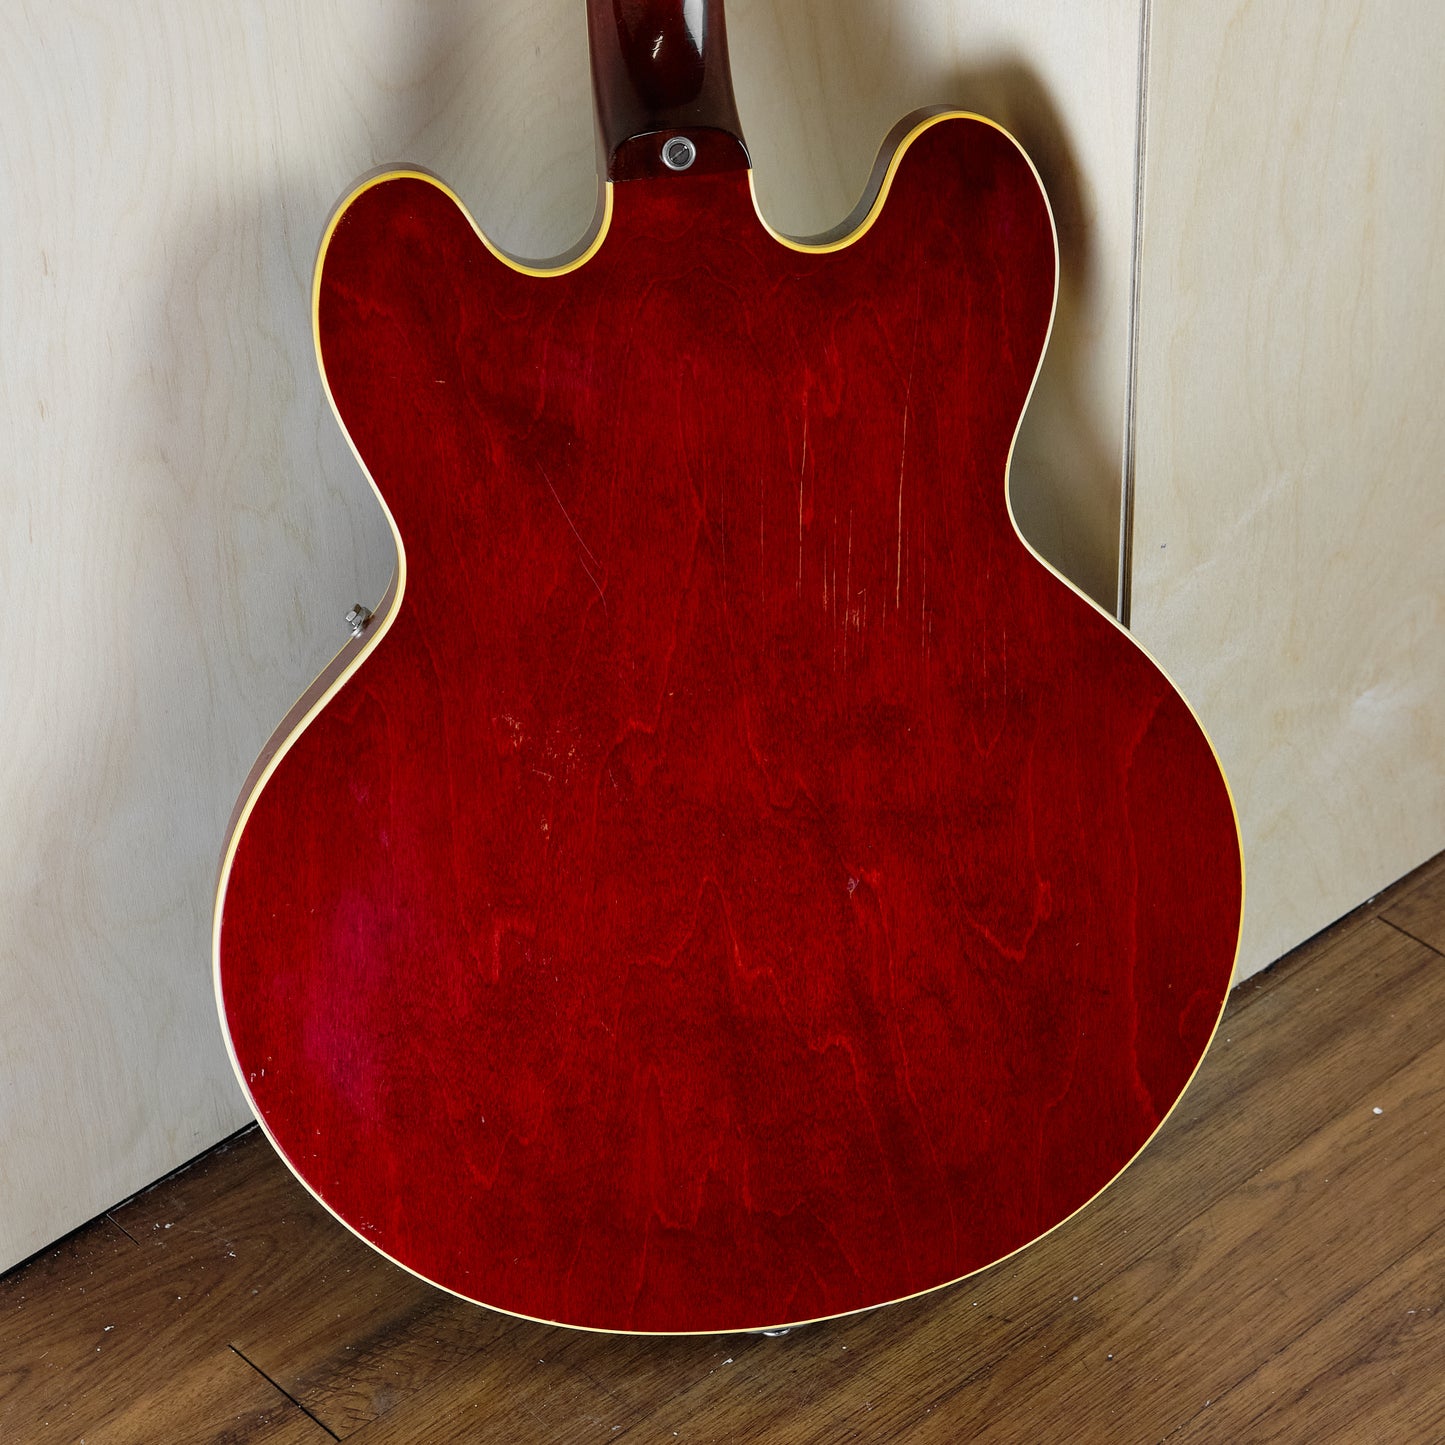 1963 Gibson ES-330 Bigsby Cherry Red